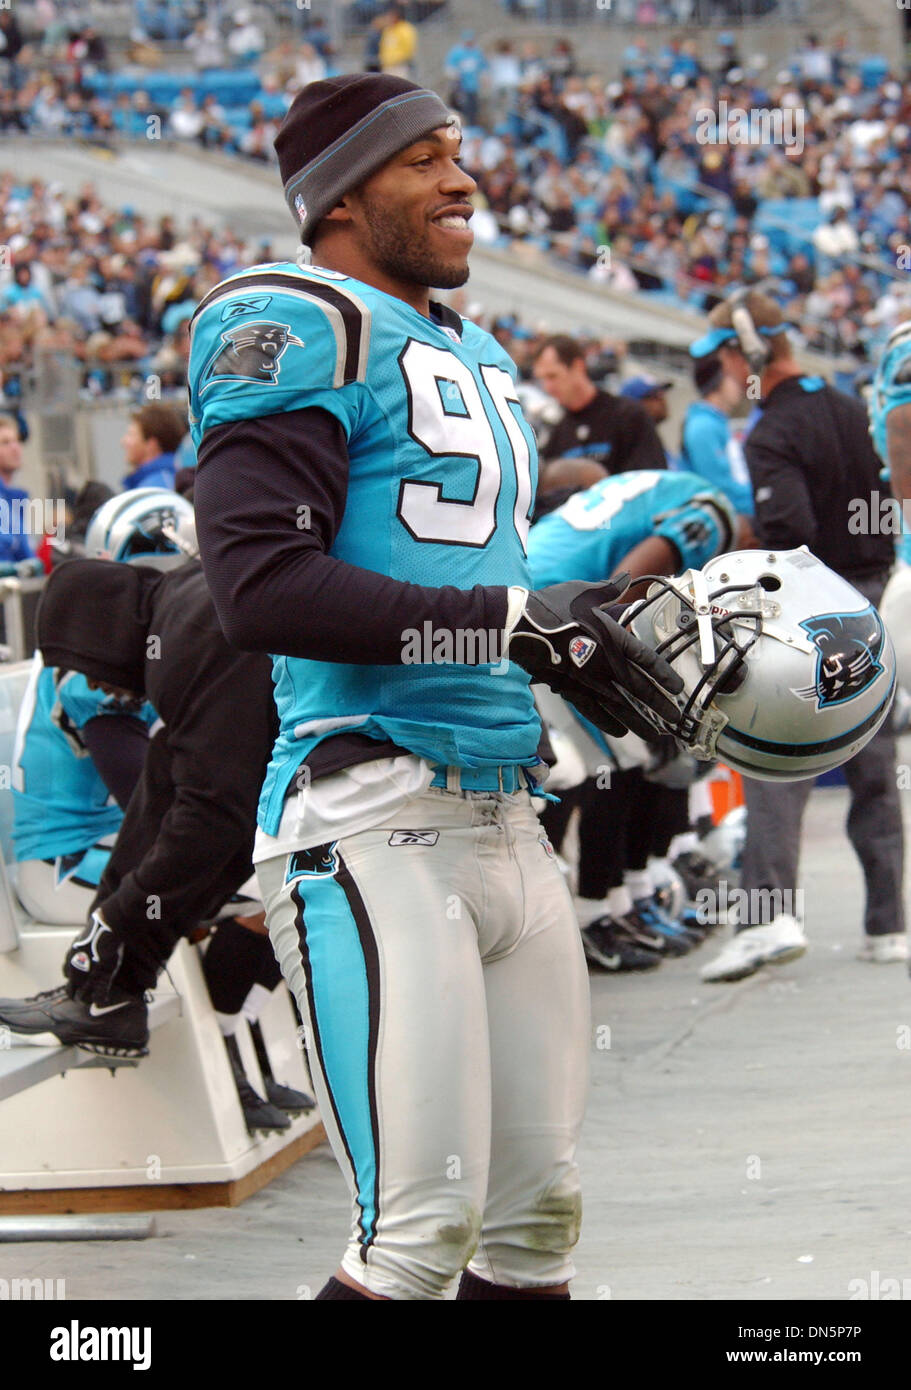 Nov 19, 2006; Charlotte, NC, USA; Carolina Panther Football Player # 90  JULIUS PEPPERS takes a moment on the sideline as the NFL Football team The Carolina  Panthers beat the St. Louis